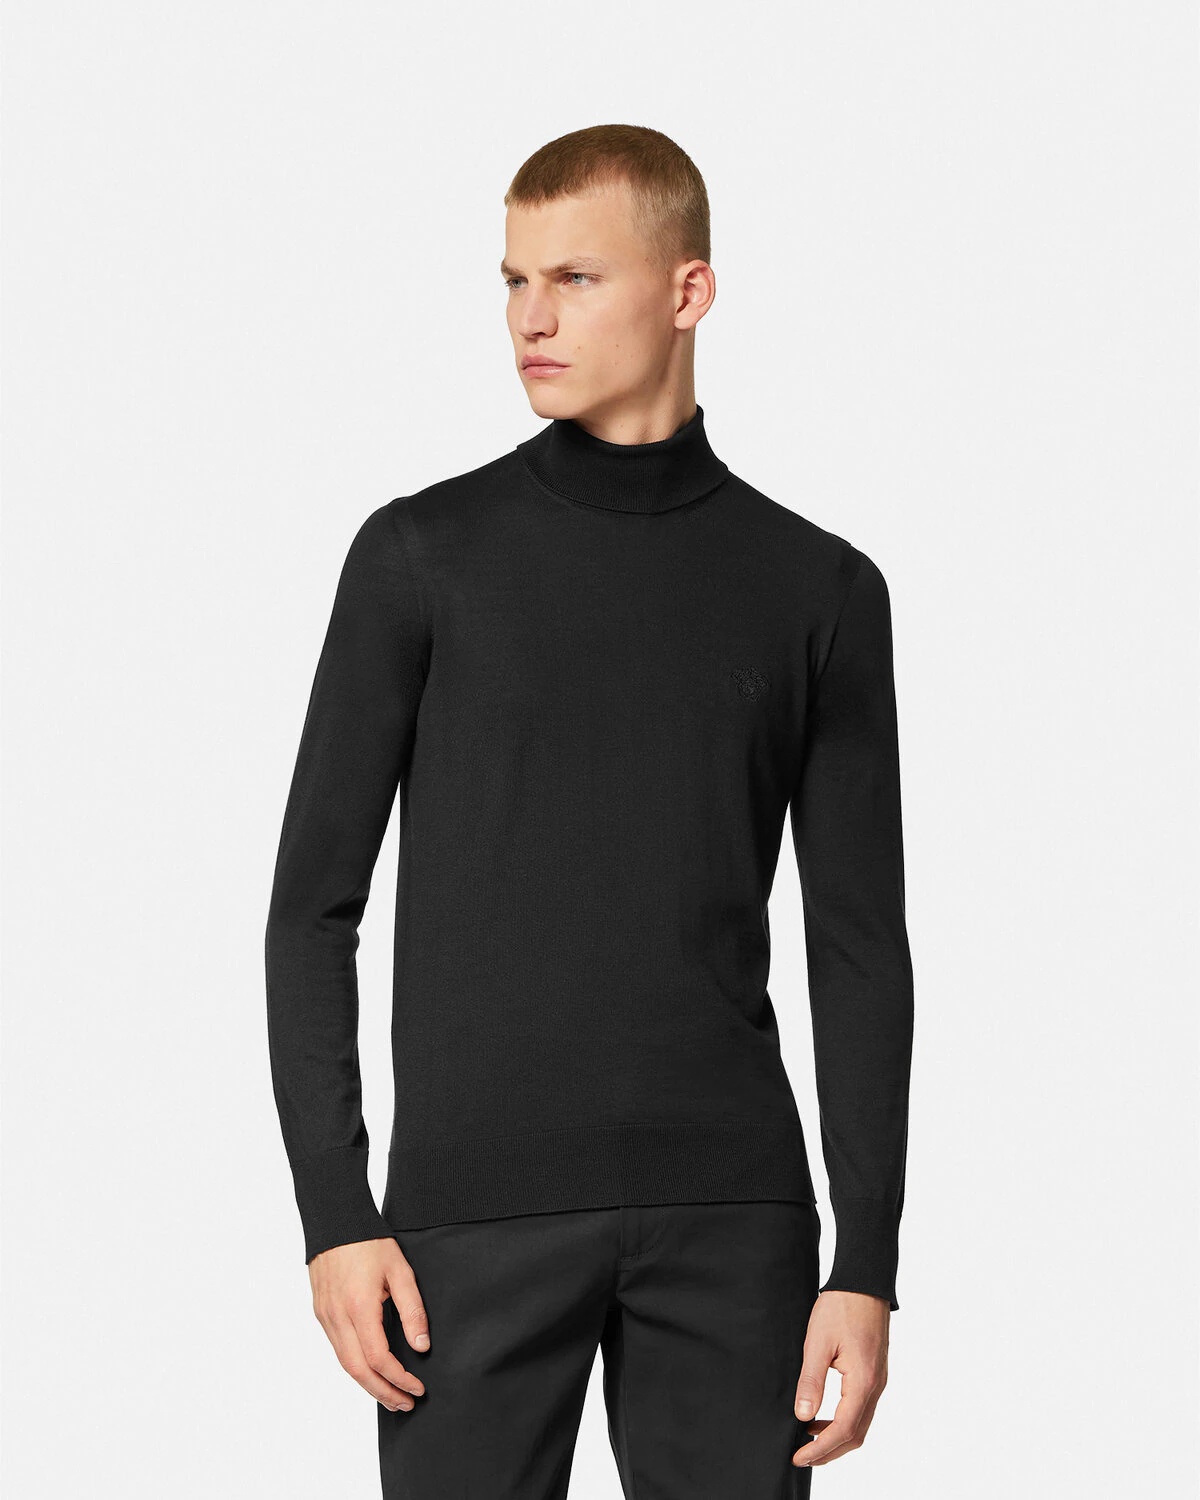 Embroidered Turtleneck Sweater - 3